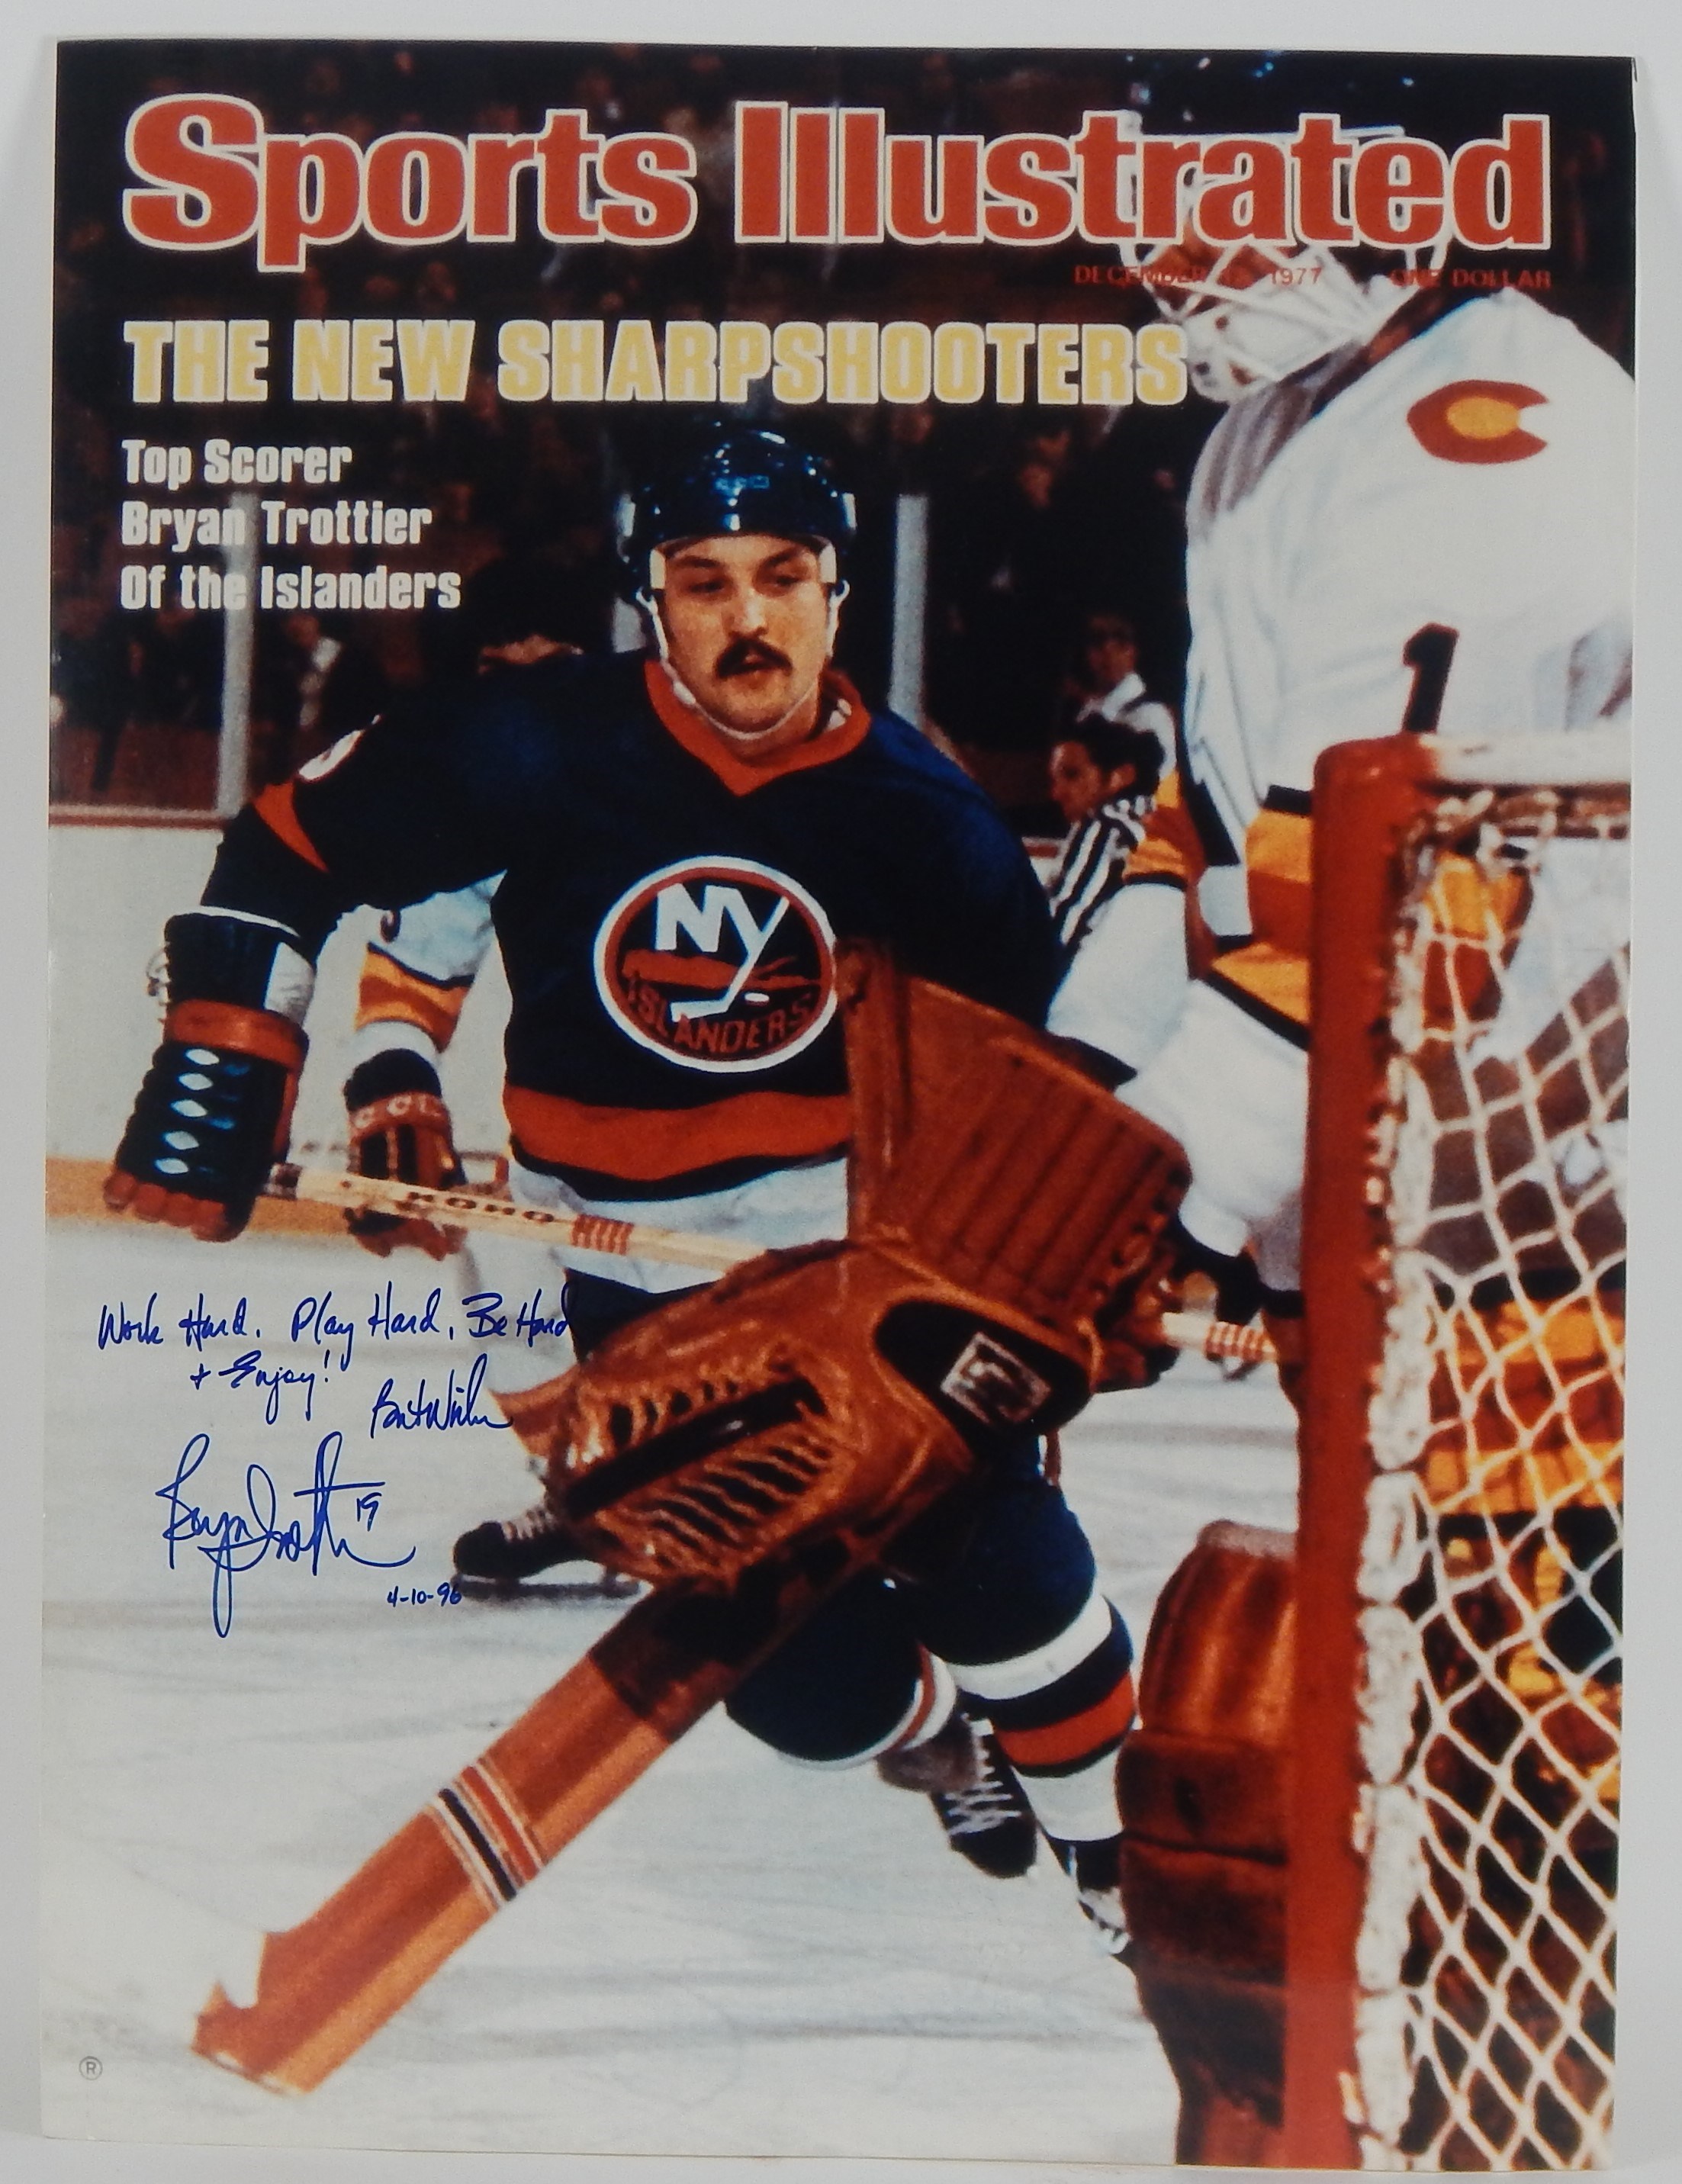 Bryan Trottier Signed Oversized Sports Illustrated Cover